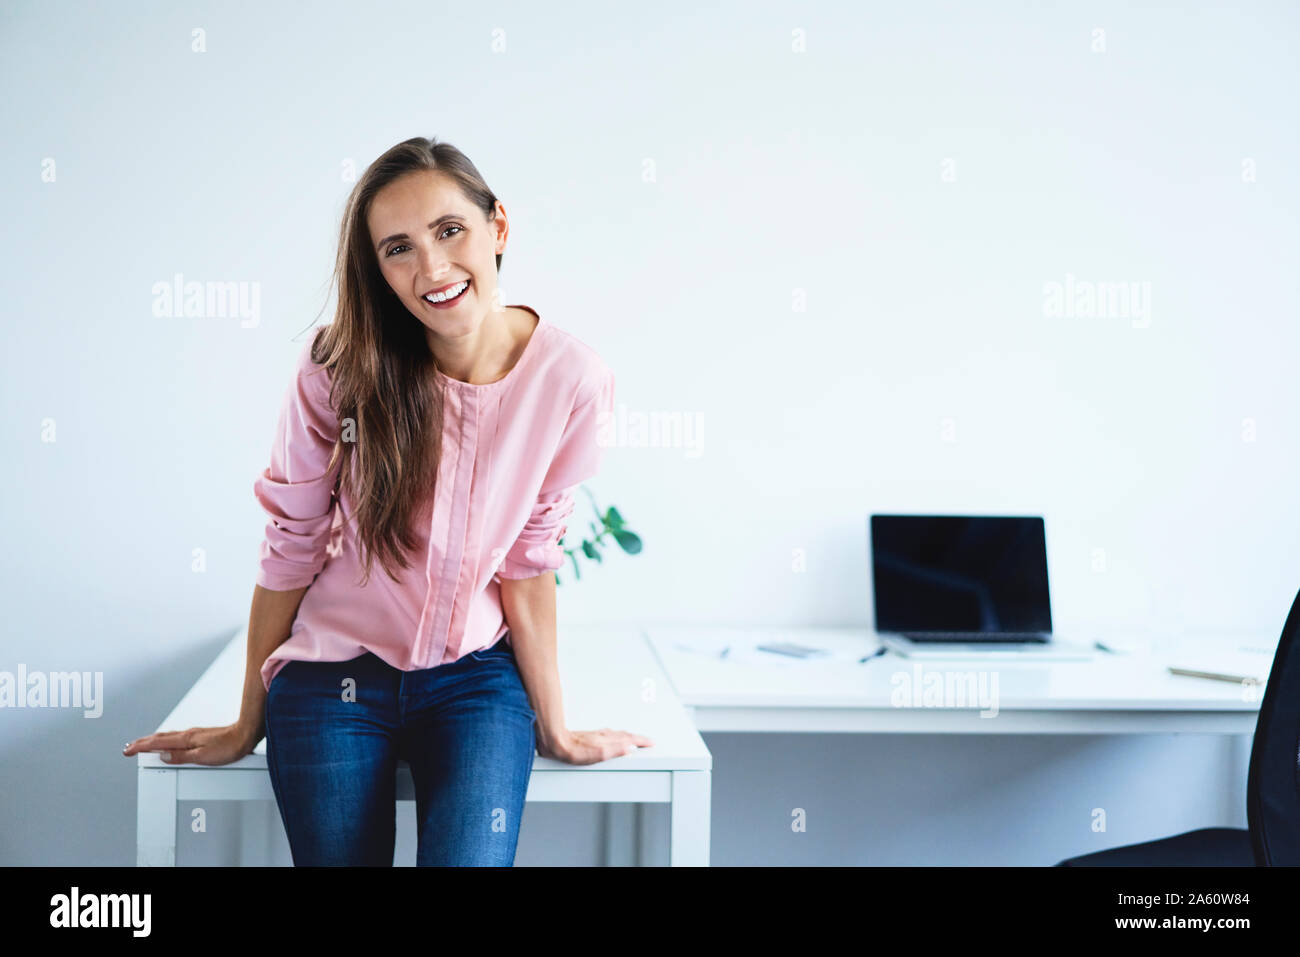 Young woman smiling at camera in office Stock Photo